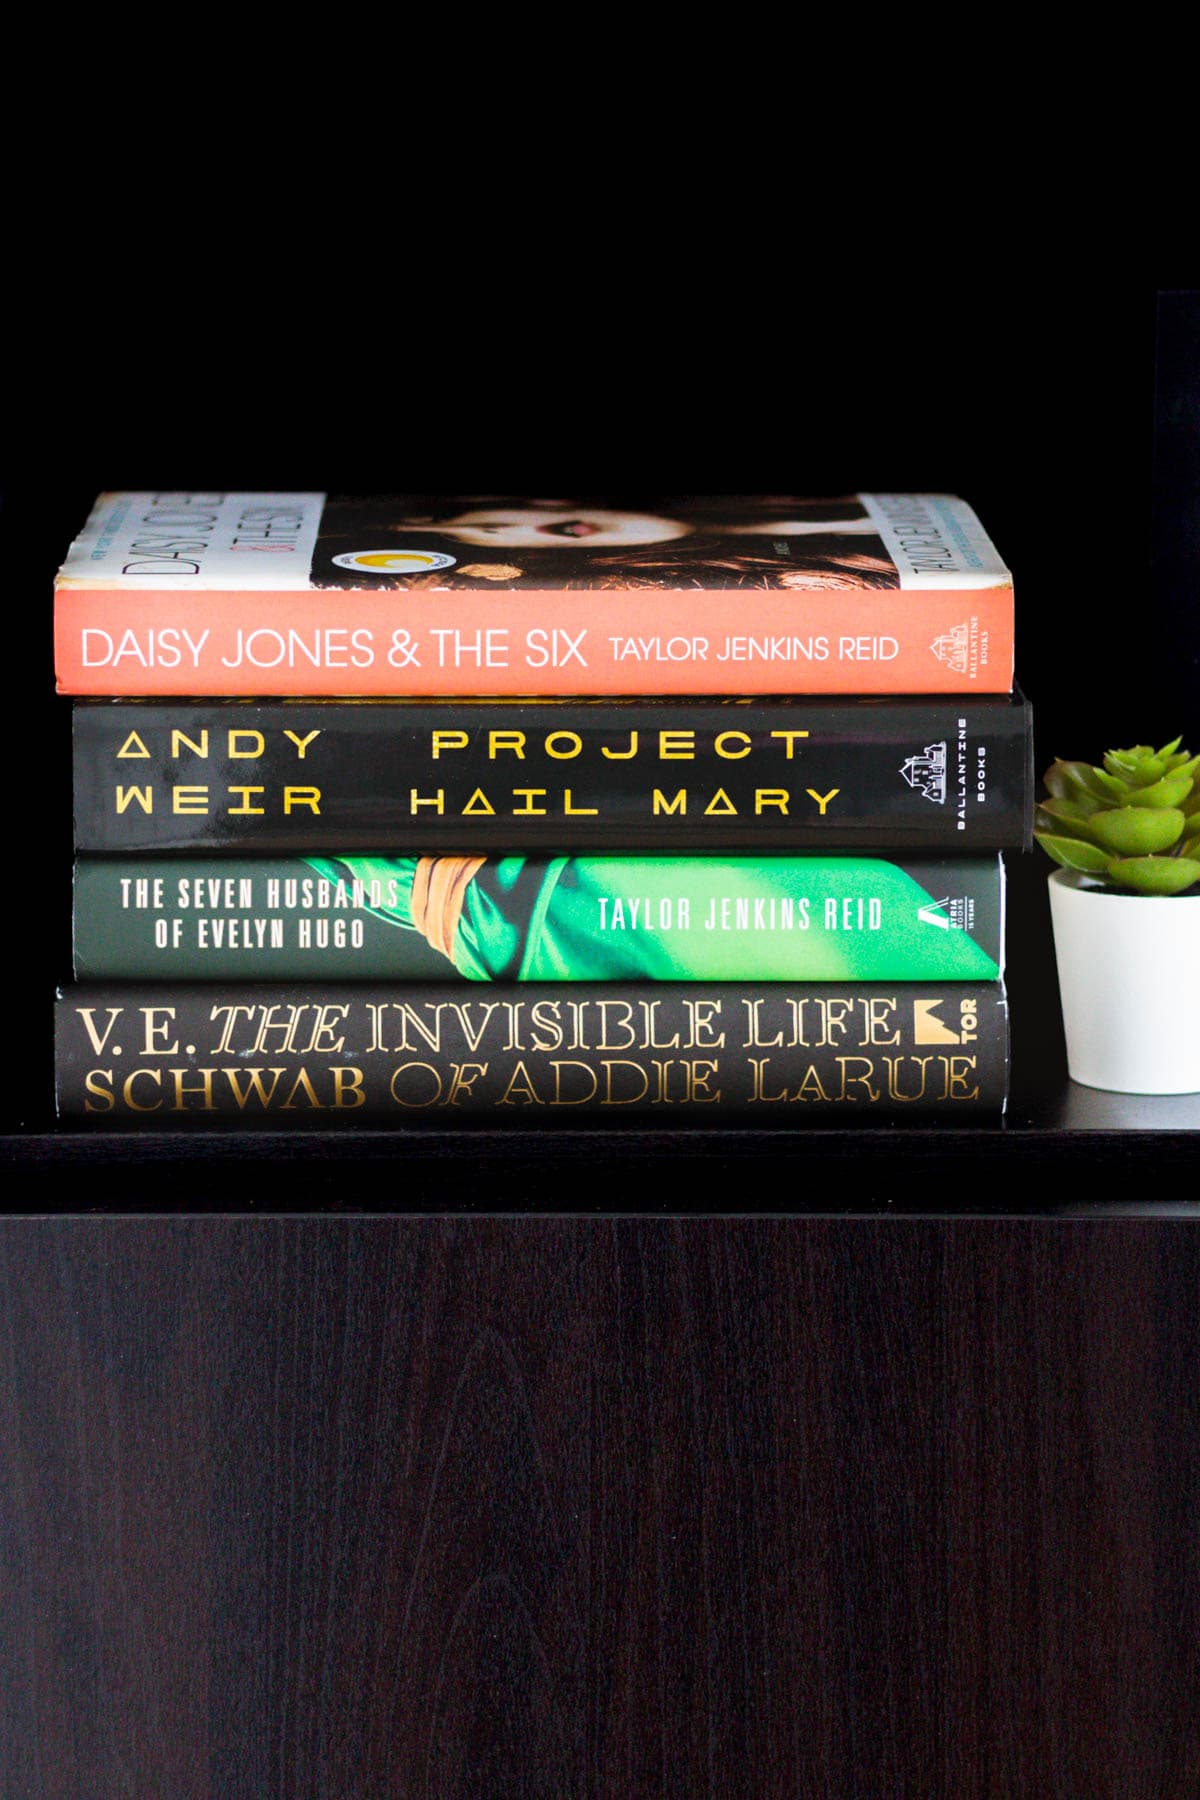 A stack of four books, Daisy Jones and the Six, Project Hail Mary, The Seven Husbands of Evelyn Hugo, and The Invisible Life of Addie La Rue